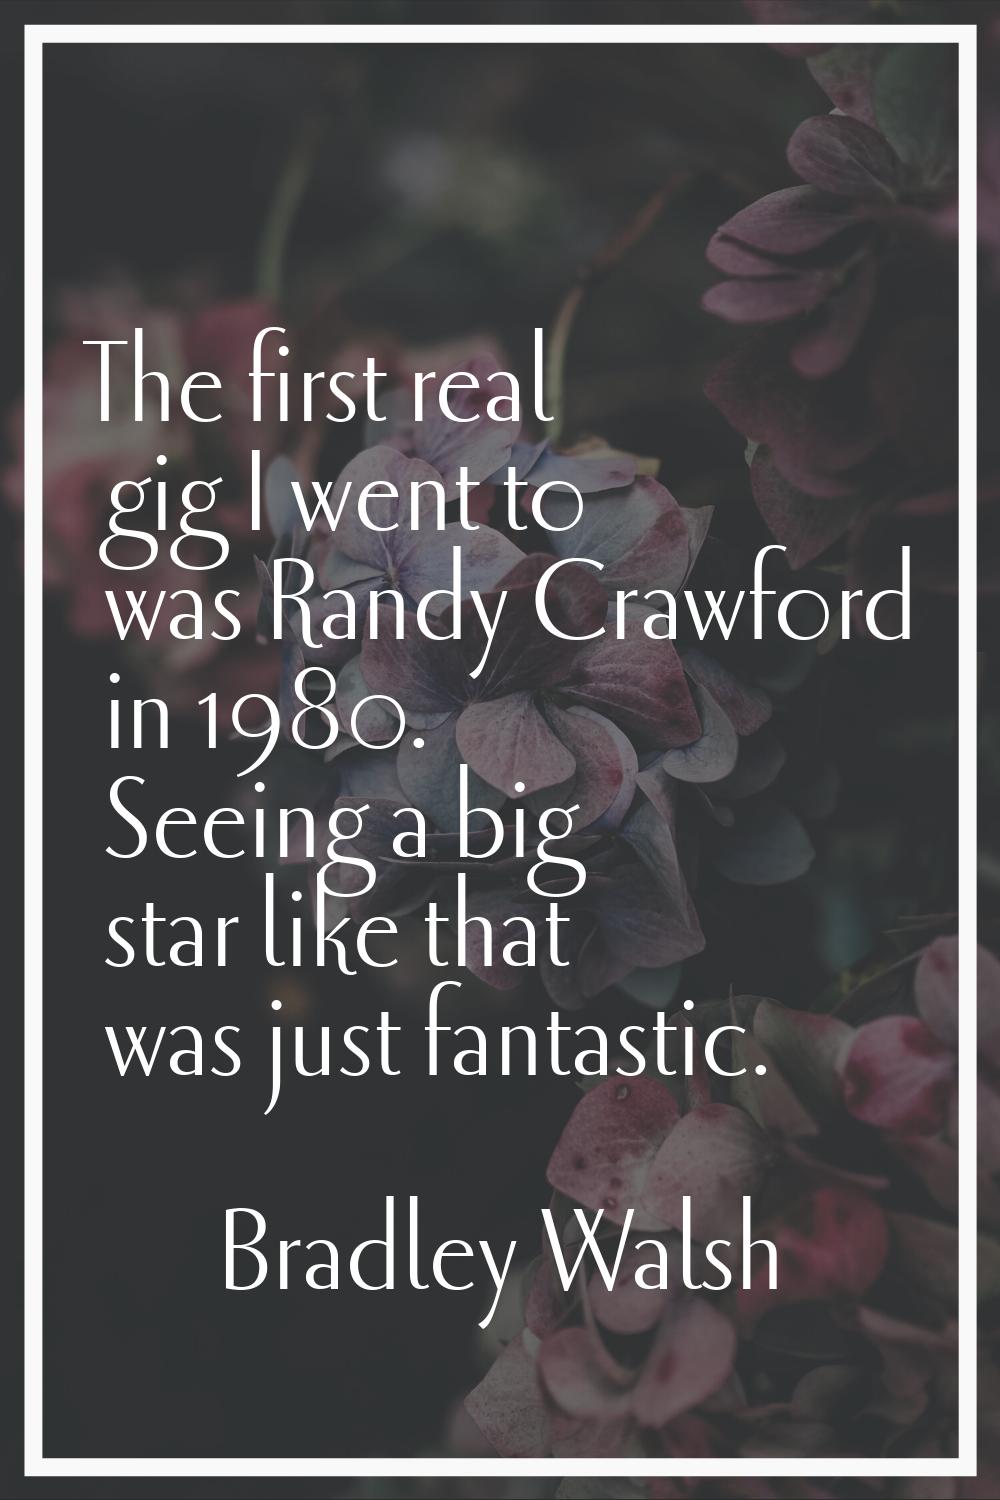 The first real gig I went to was Randy Crawford in 1980. Seeing a big star like that was just fanta